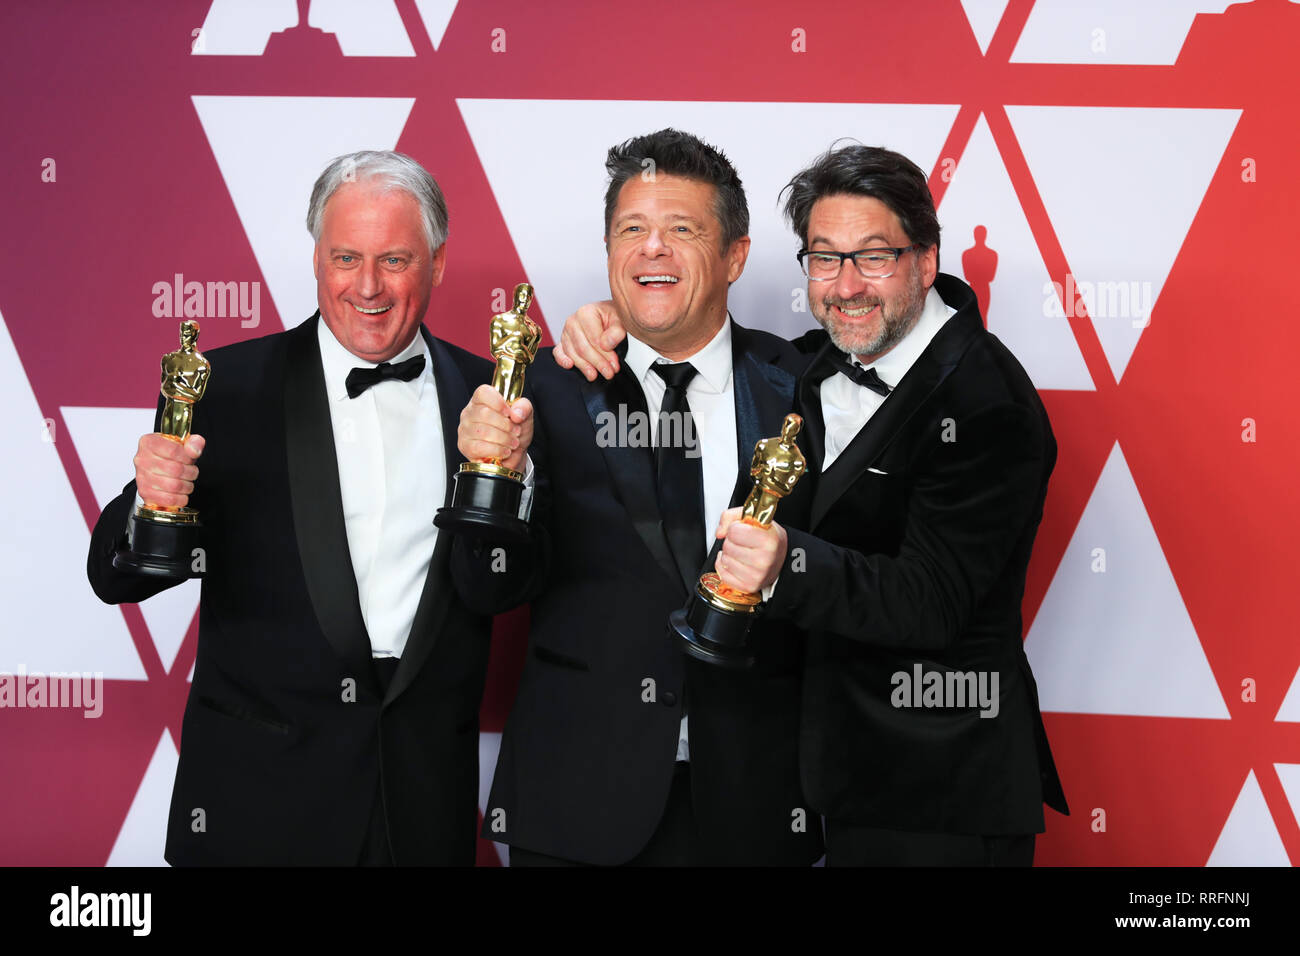 Los Angeles, USA. 24th Feb, 2019. (L-R) Paul Massey, Tim Cavagin and John Casali, winners of the Best Sound Mixing award for ' Bohemian Rhapsody,' pose for photos in the press room during the 91st Academy Awards (Oscars) ceremony at the Dolby Theatre in Los Angeles, the United States, on Feb. 24, 2019. Credit: Li Ying/Xinhua/Alamy Live News Stock Photo